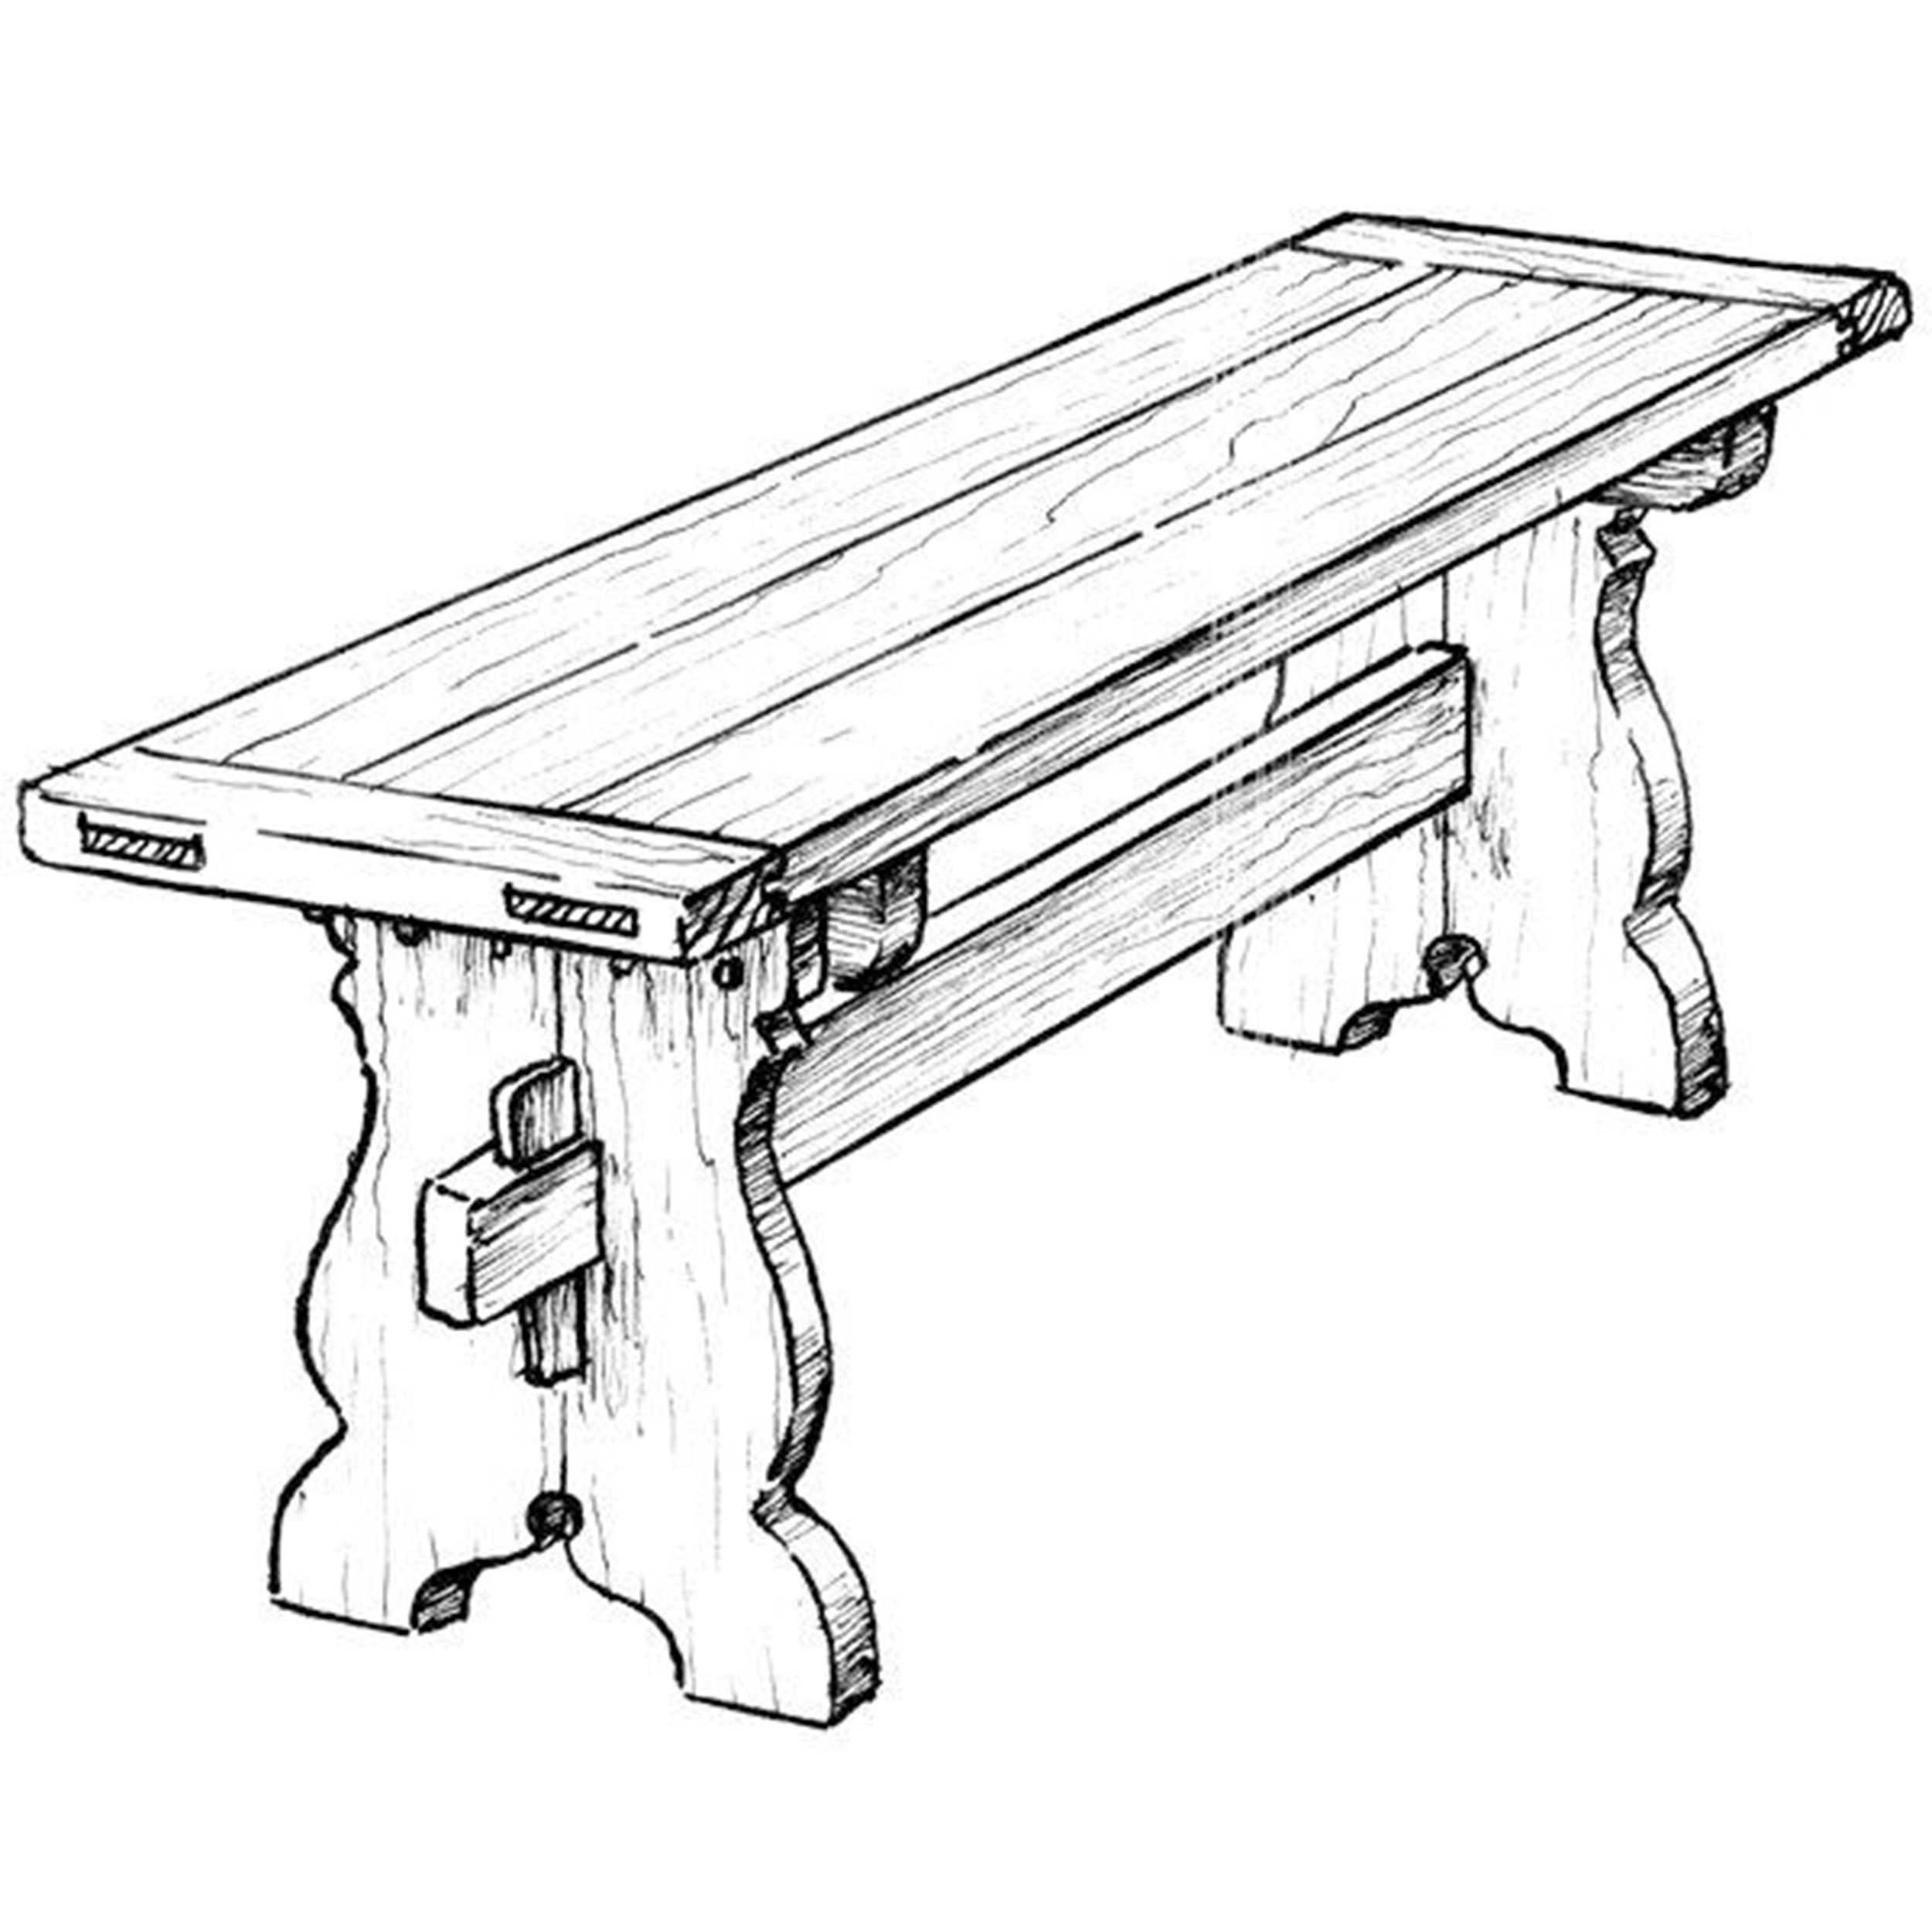 Woodworking Project Paper Plan To Build Trestle Bench